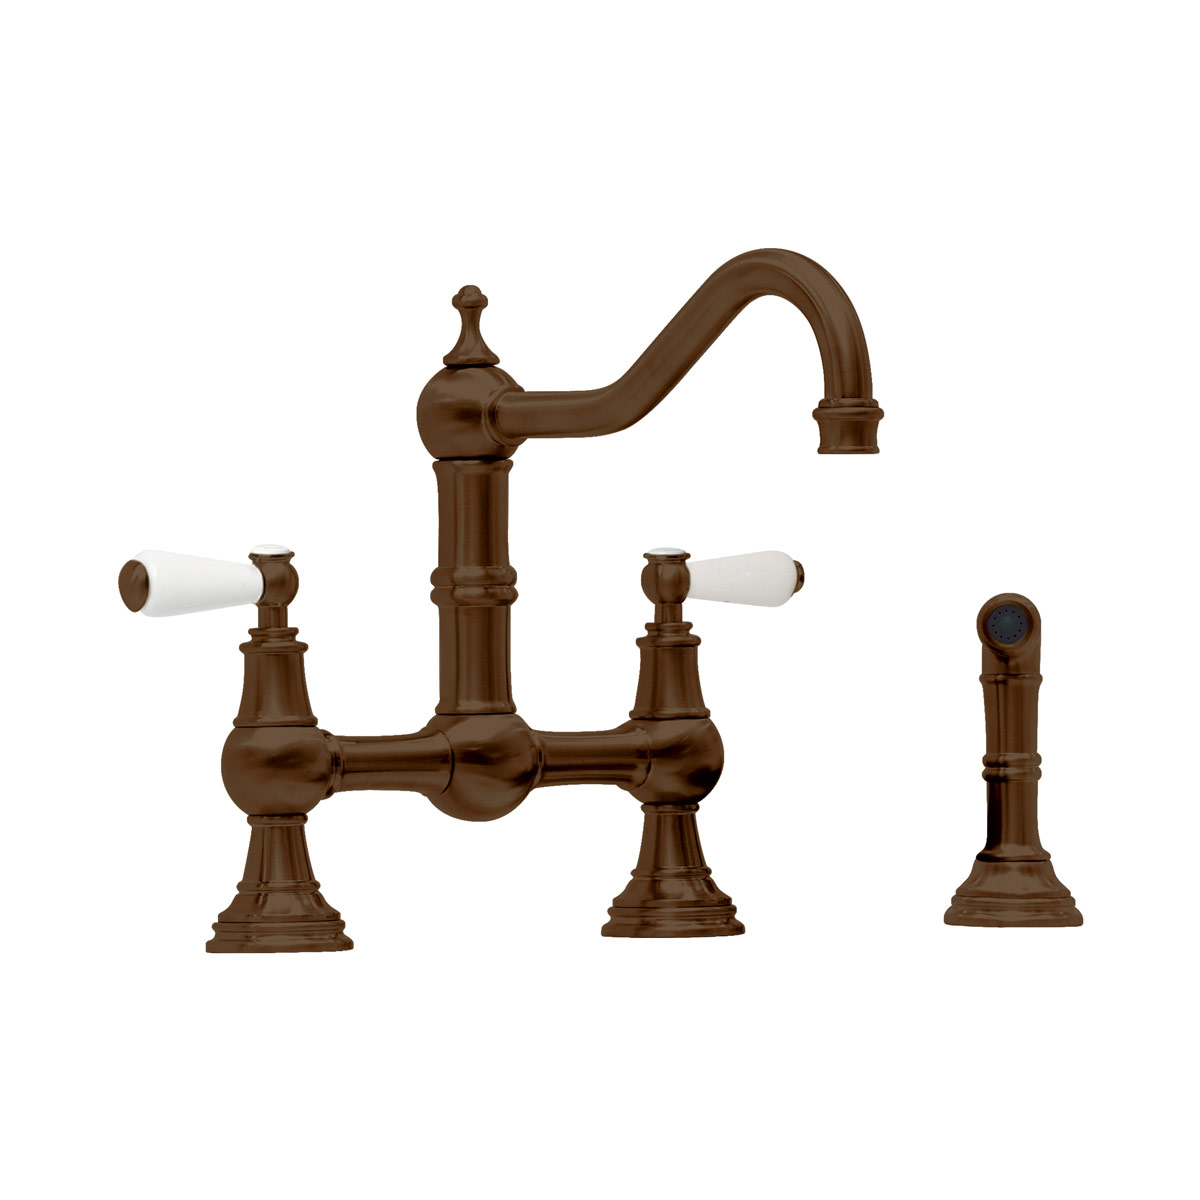 Shaws by Perrin & Rowe Hambleton French bridge mixer with spray rinse in English Bronze. Provence style kitchen tap AUSH.4756. Distributed in Australia by Luxe by Design, Brisbane.